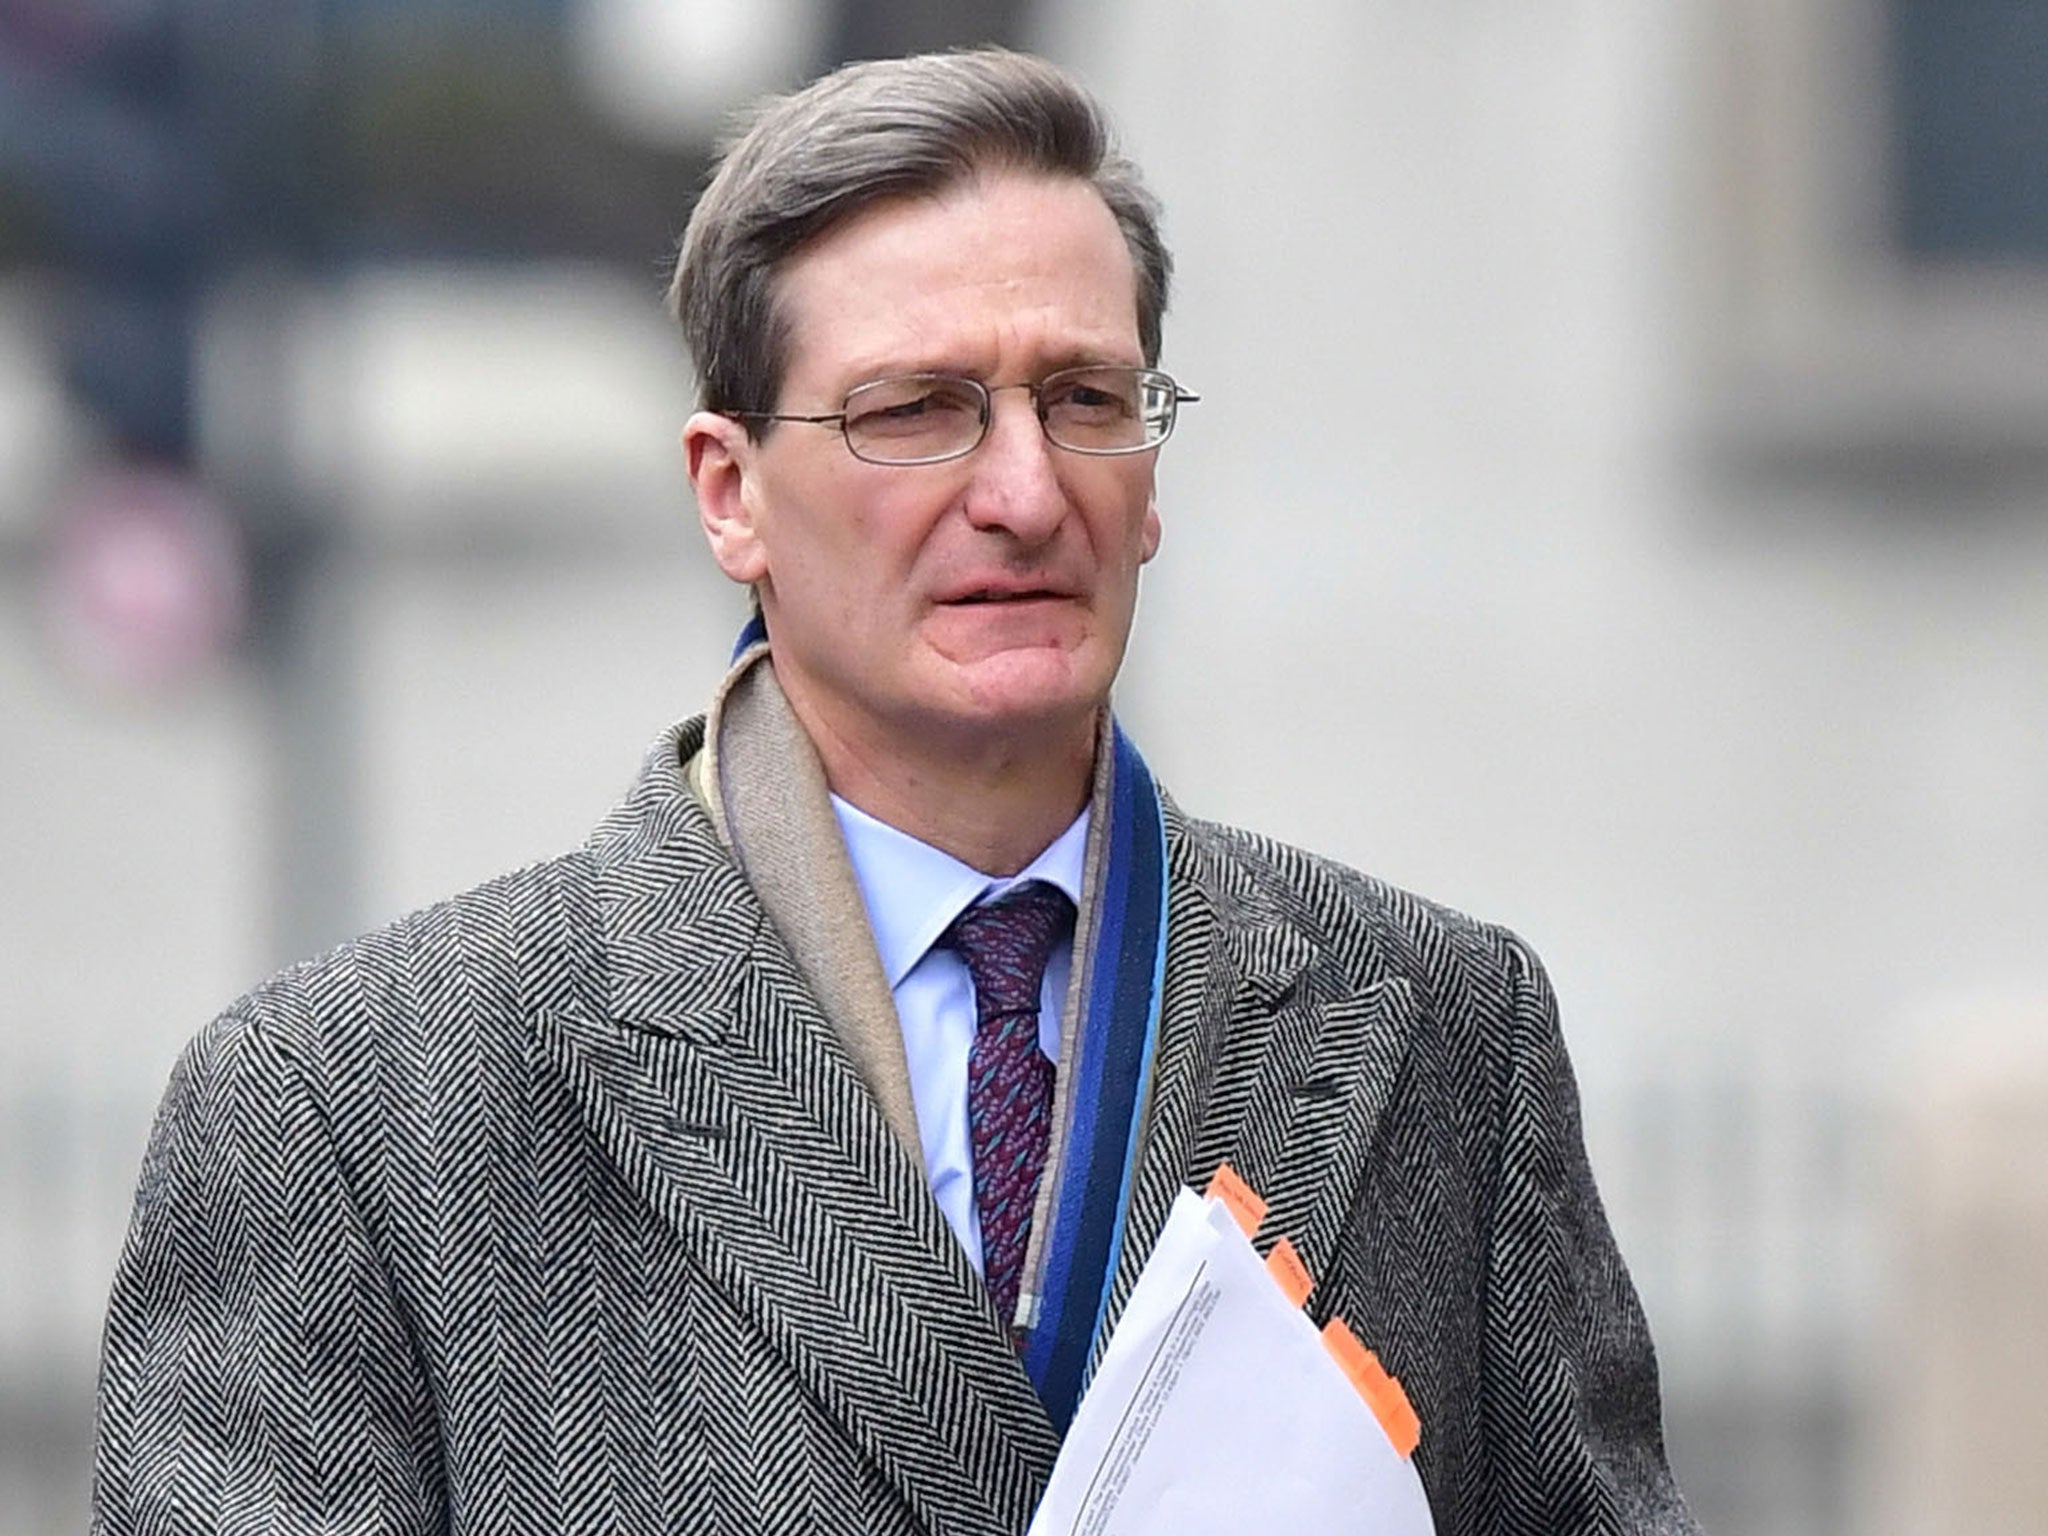 Dominic Grieve heads the ISC, which today released a report on the UK intelligence agencies' knowledge of torture during the Iraq War